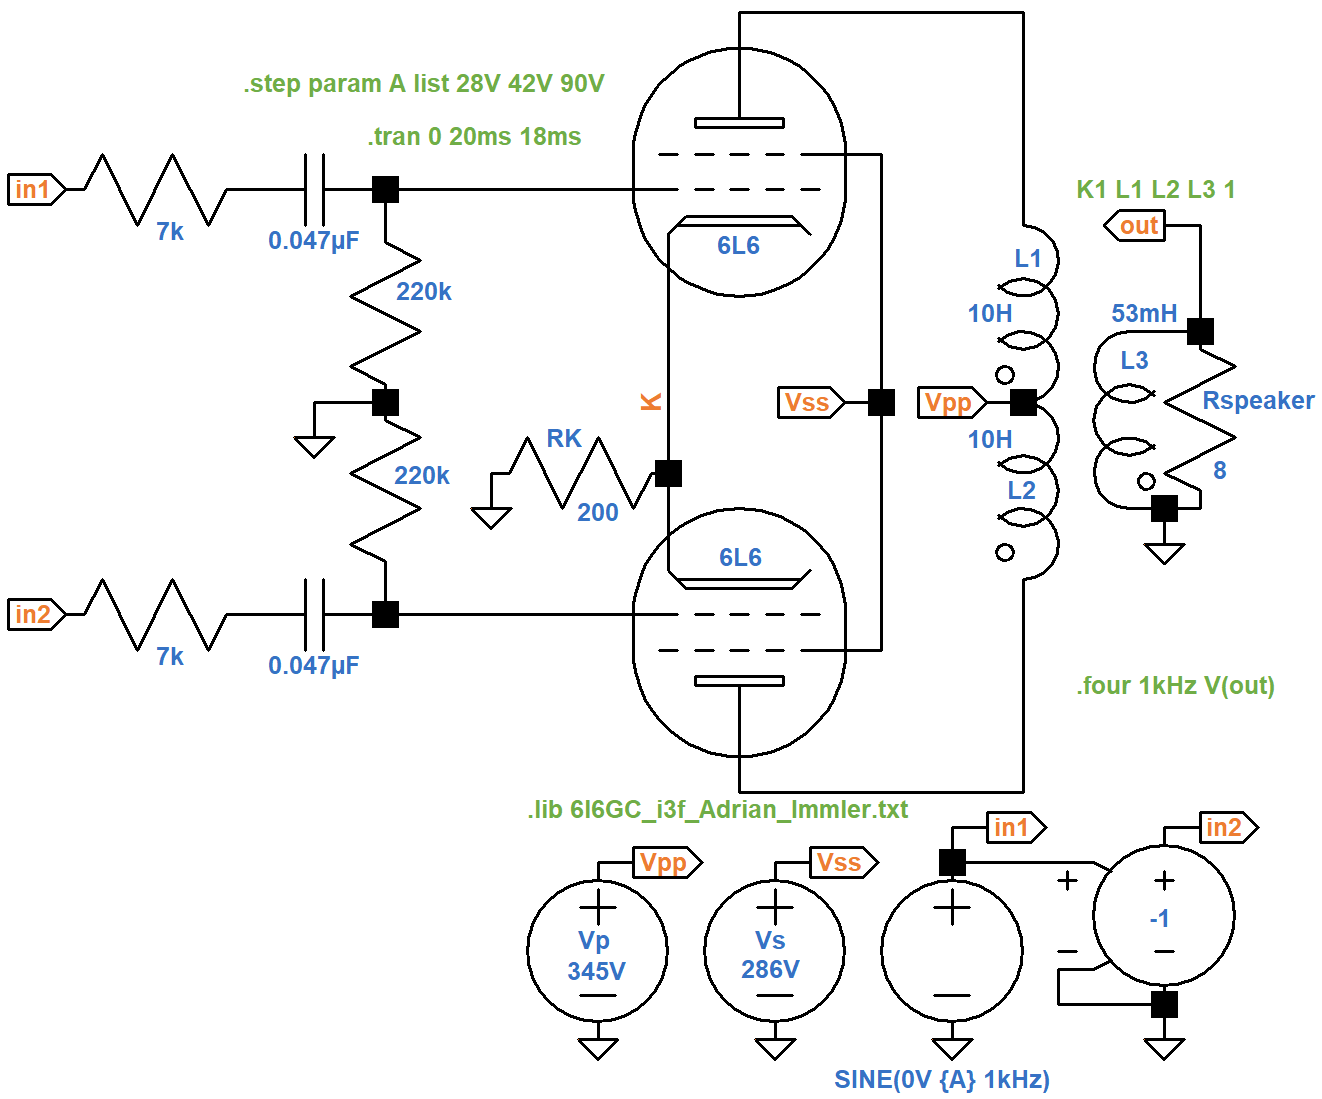 power amp input circuit under overdrive conditions with an unbypassed cathode resistor